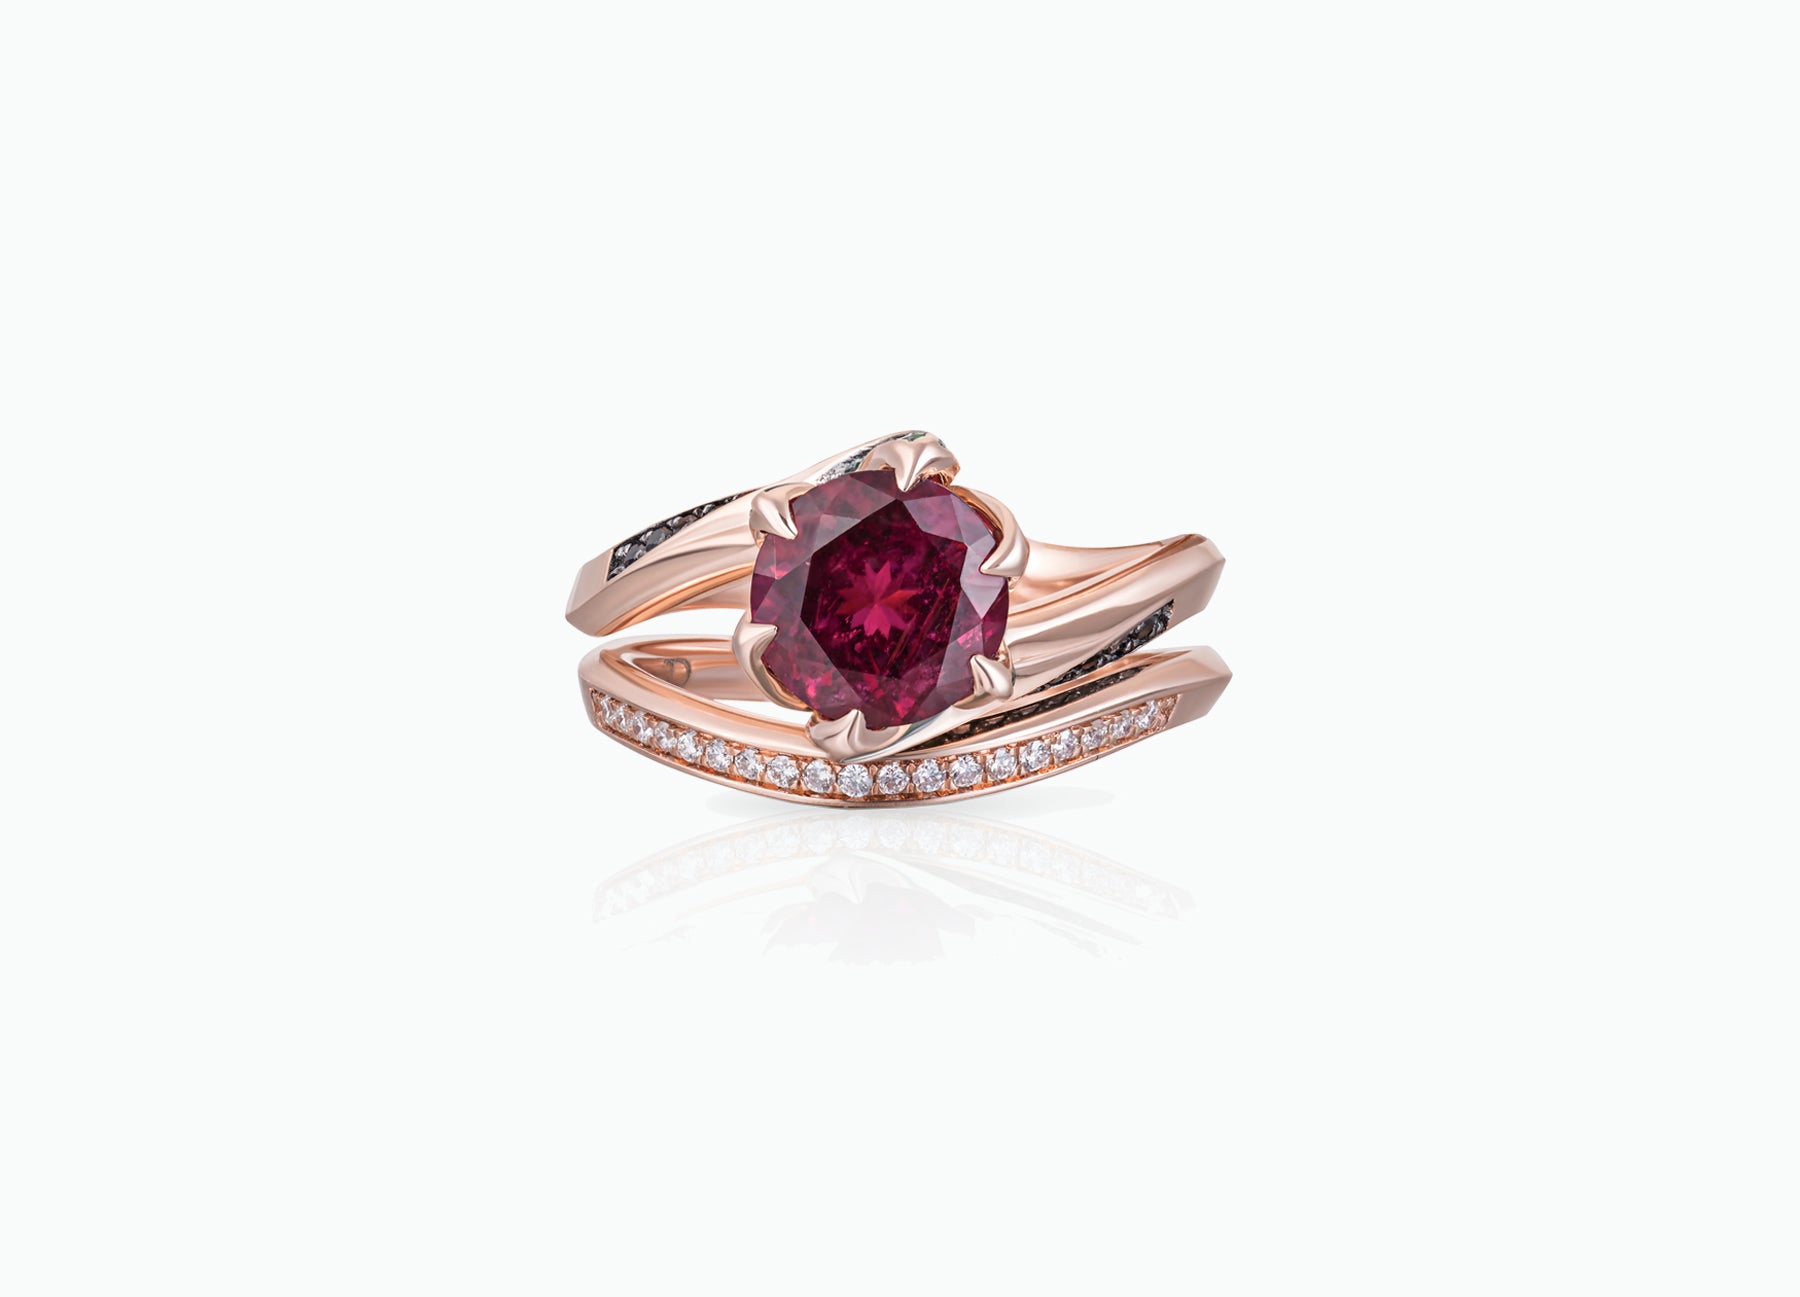 Lily Pad Bridal Set Rings in 18K Rose Gold Inspired By Beauty And The Beast Enchanted Rose - Top View